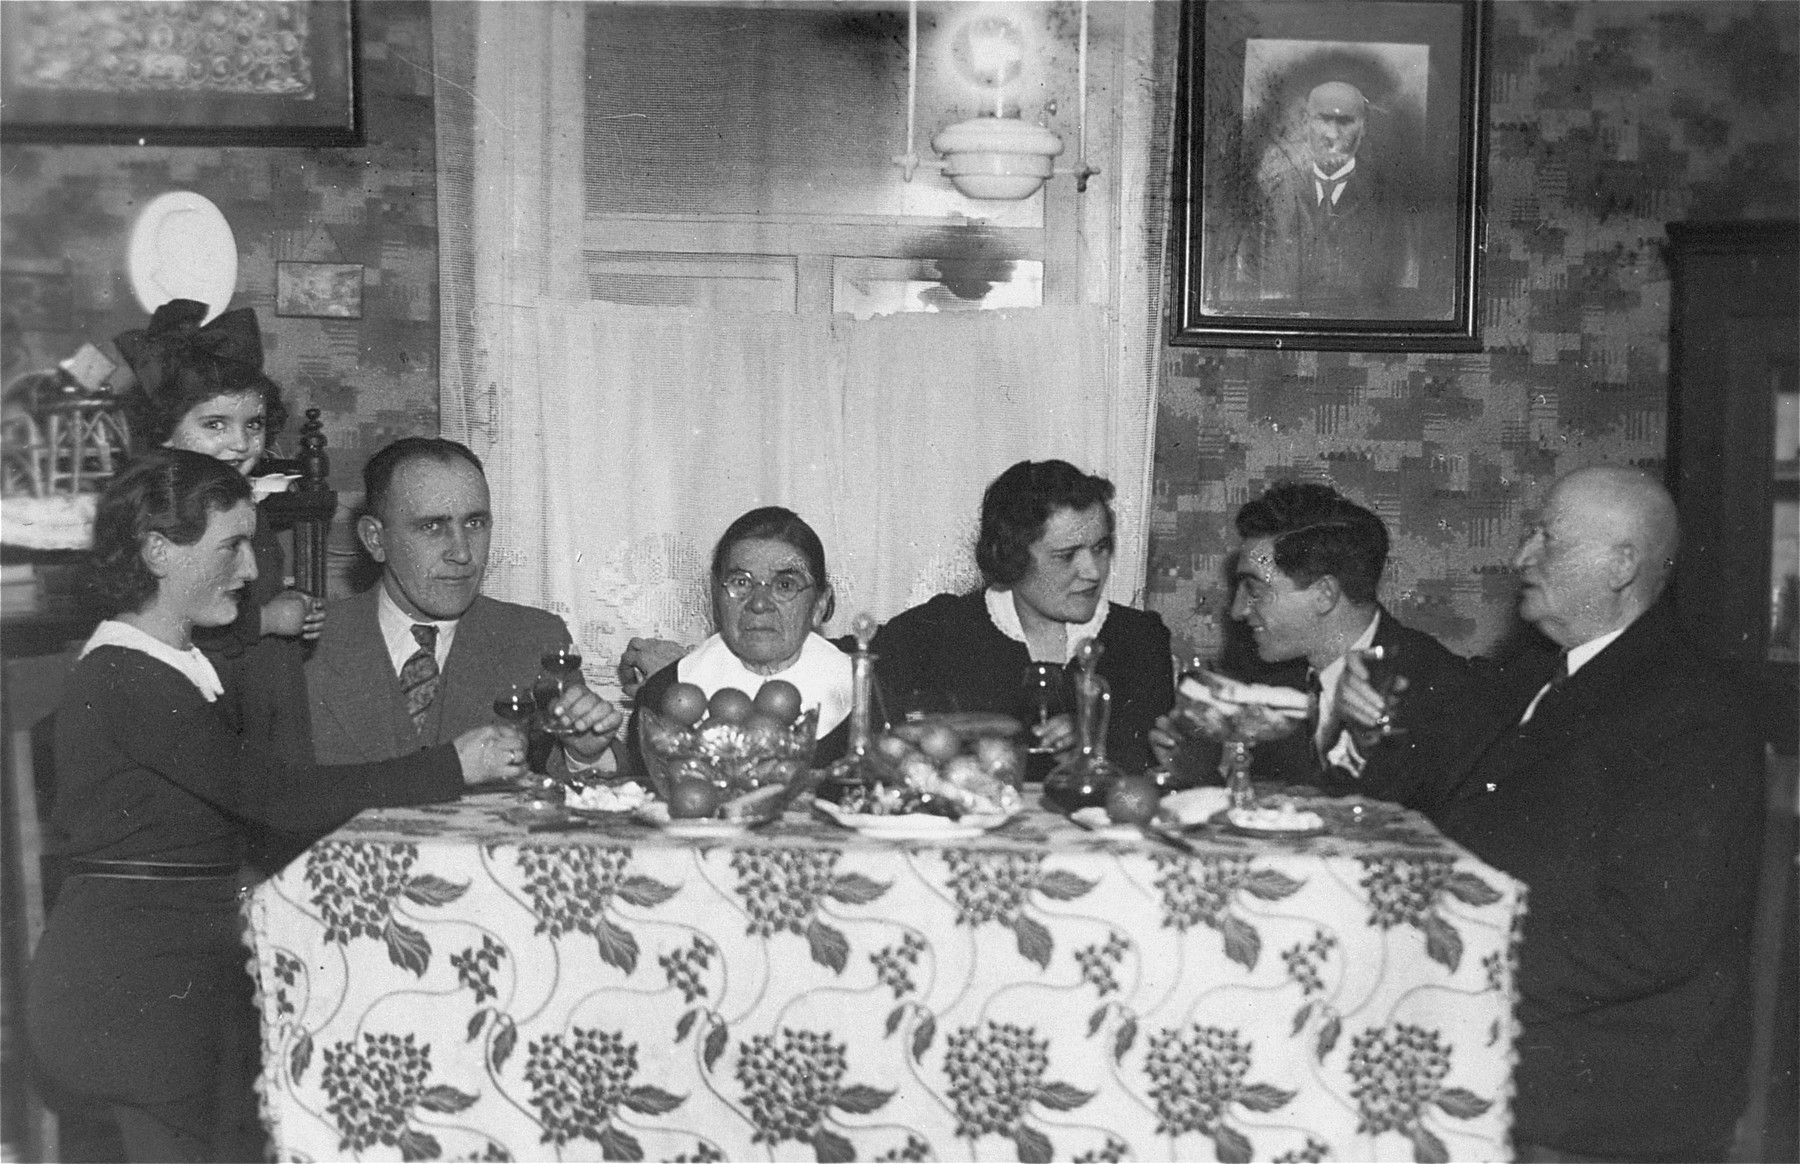 The engaged couple, Eliezer and Chaya Gar, eat at the Gar home in Kron.

Pictured from left to right are: Baila, Chaviva, Jacob, Esther, and Chaya Gar; Eliezer Kaplan, and David Tkatch, a cousin of the Gars.